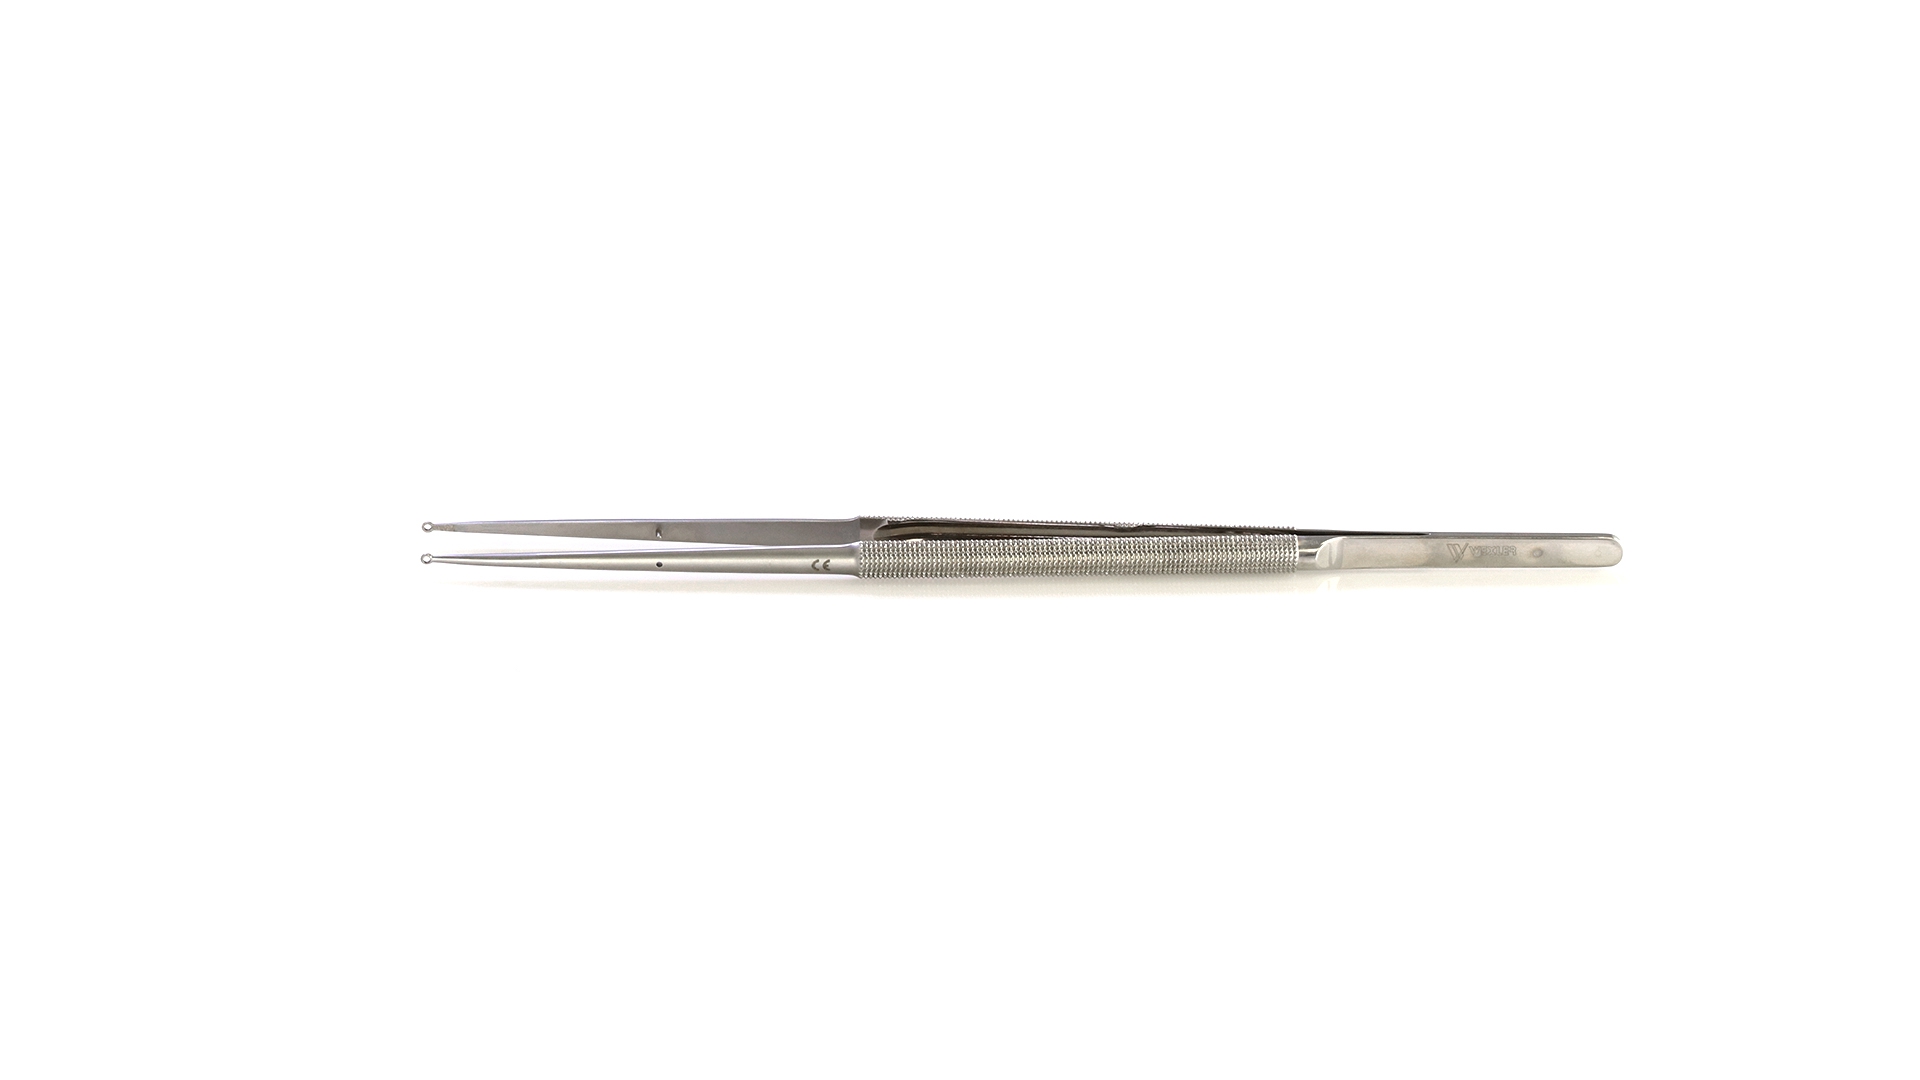 Ring tip Forceps - Straight 2.5 mm TC coated rings